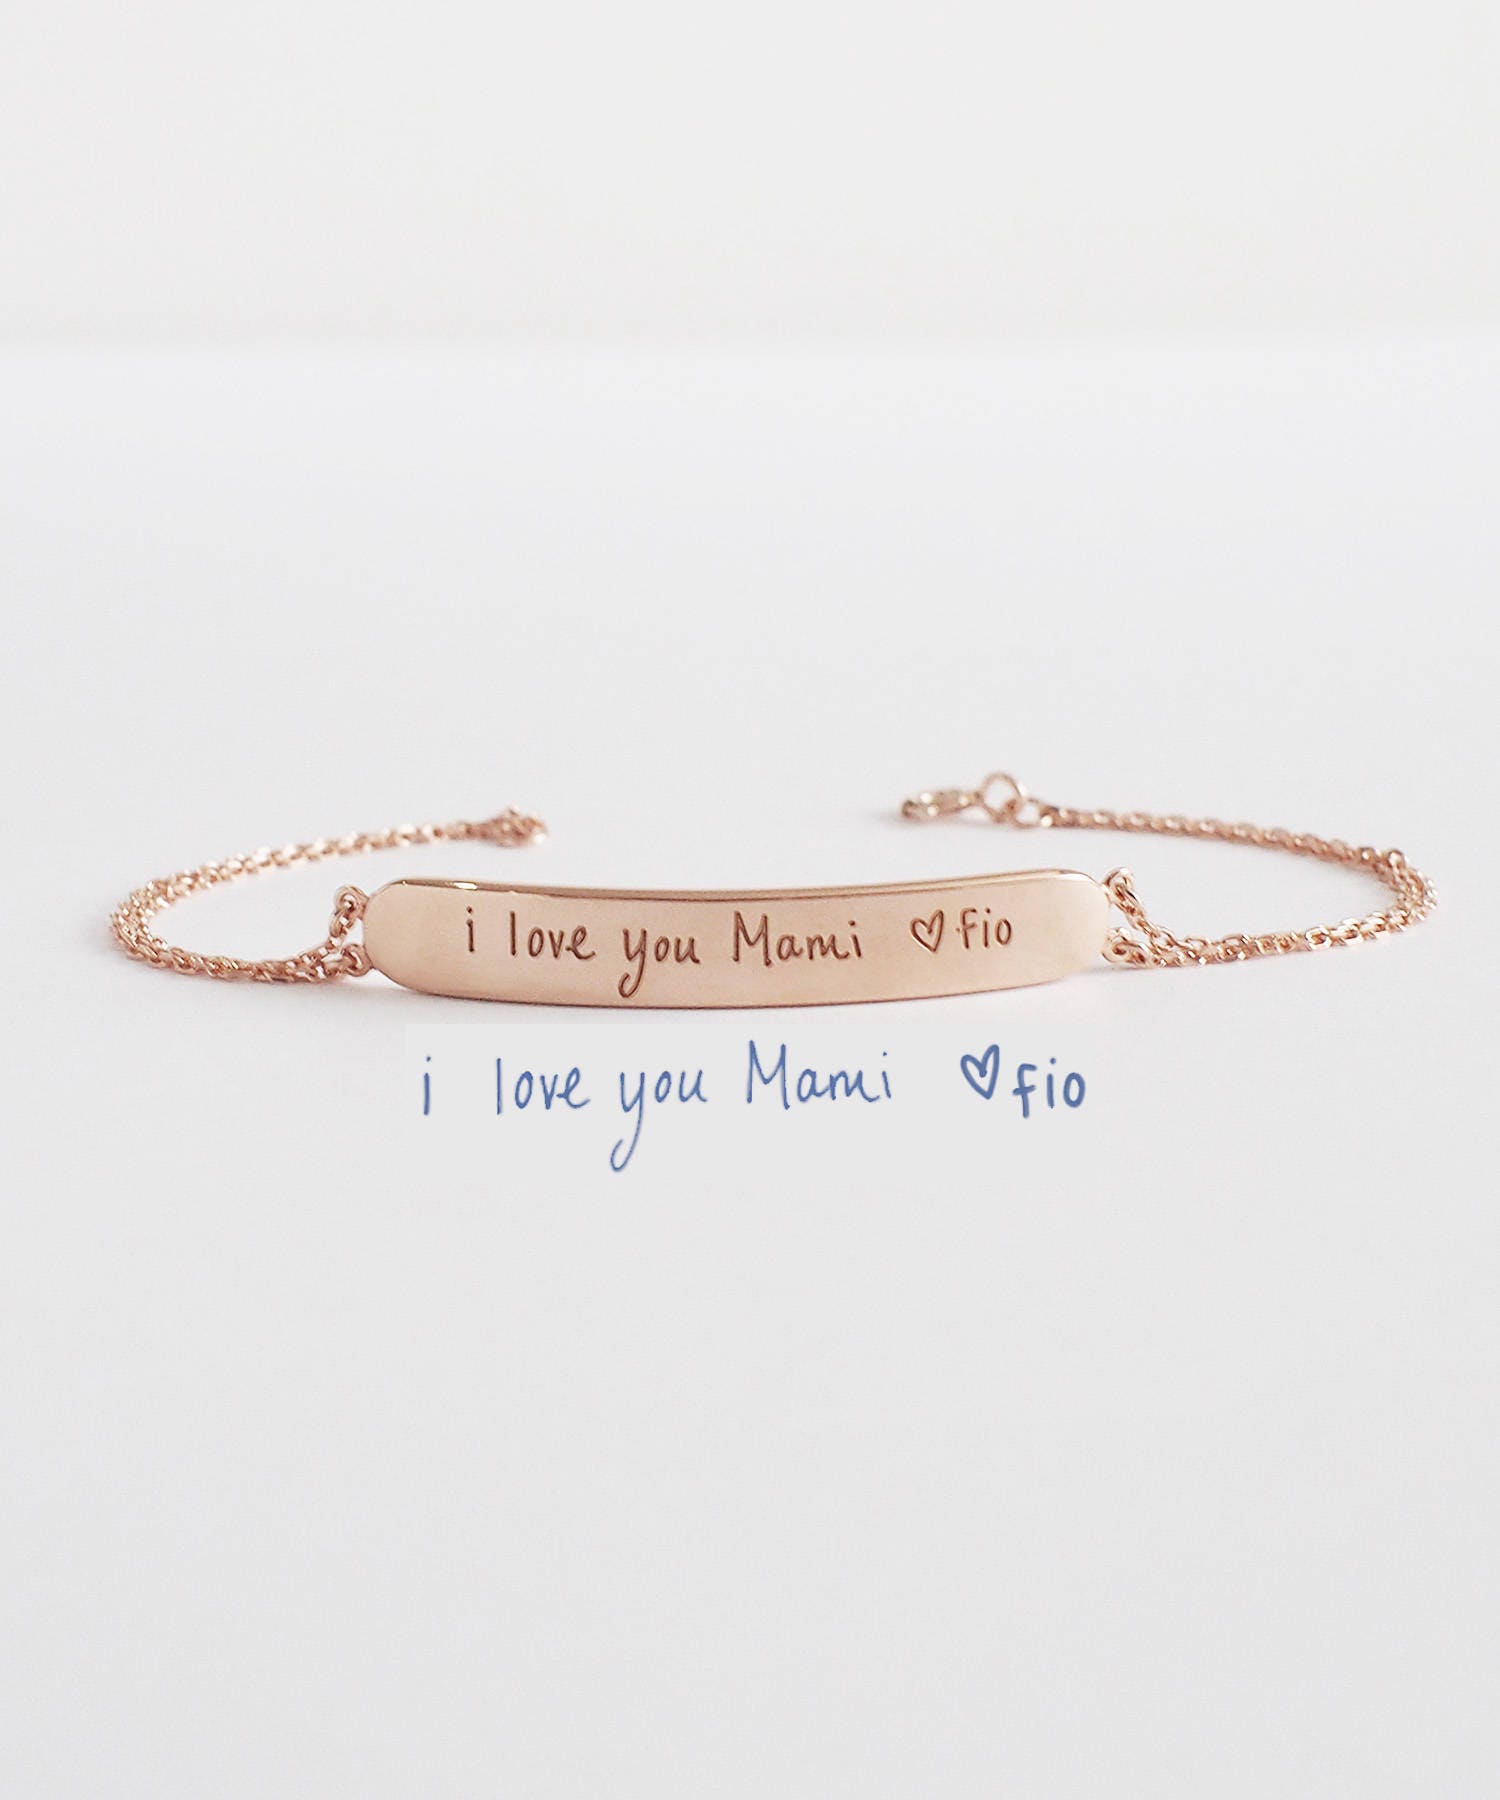 Mother/'s Day Handmade Jewelry Custom Jewelry Gifts for Her Personalized Bar Bracelet Personalized Handwriting Jewelry Etched Jewelry